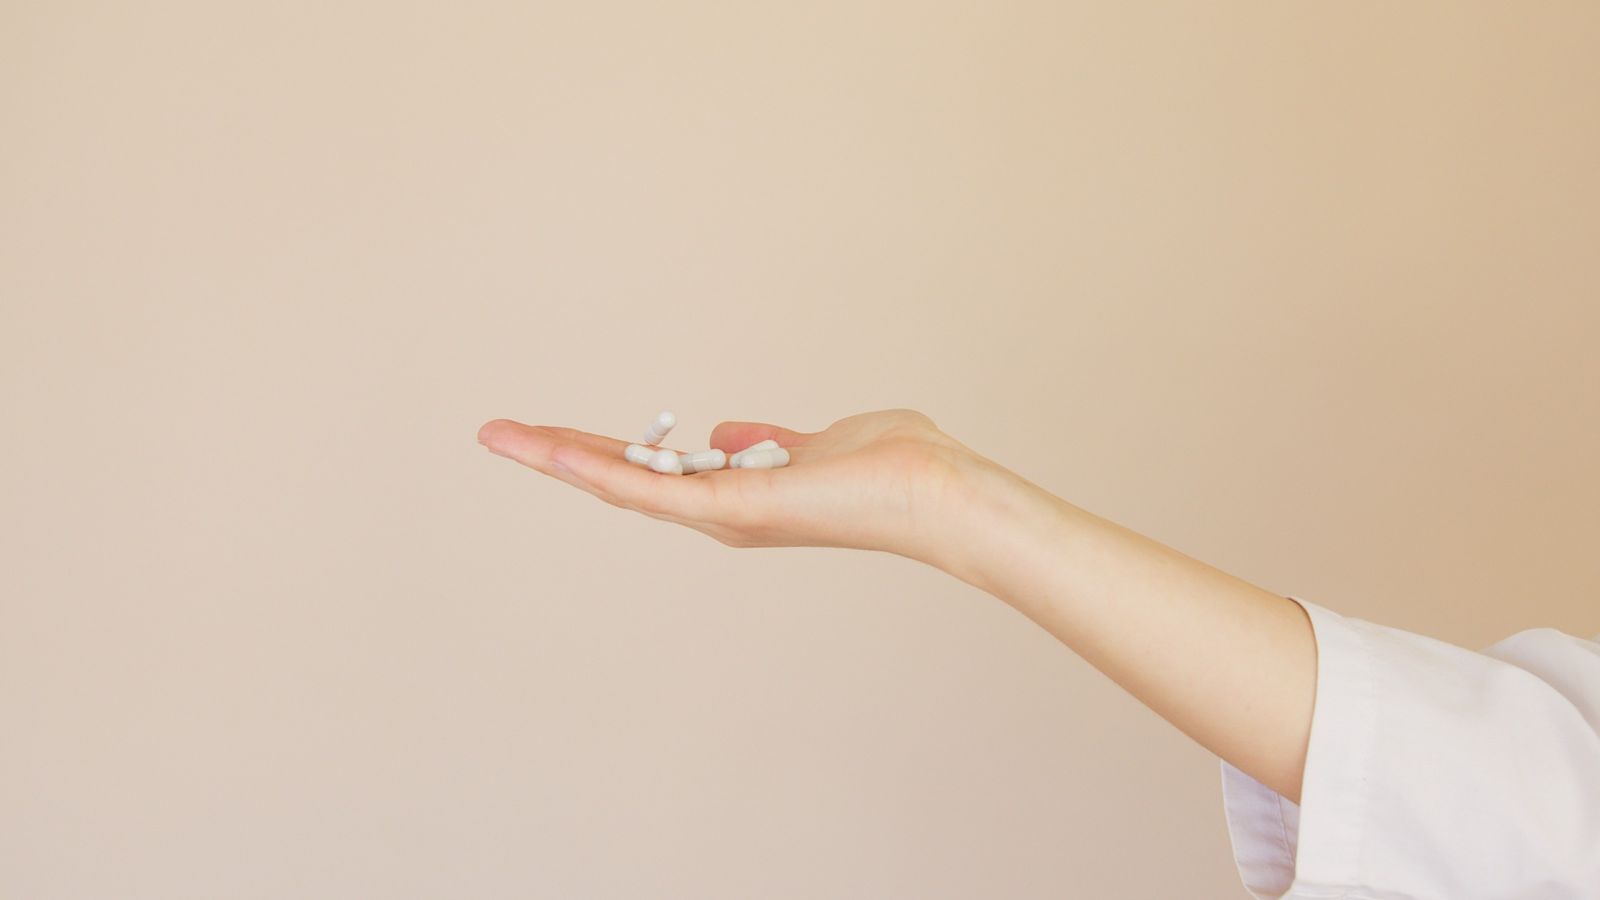 White pills in person's hand